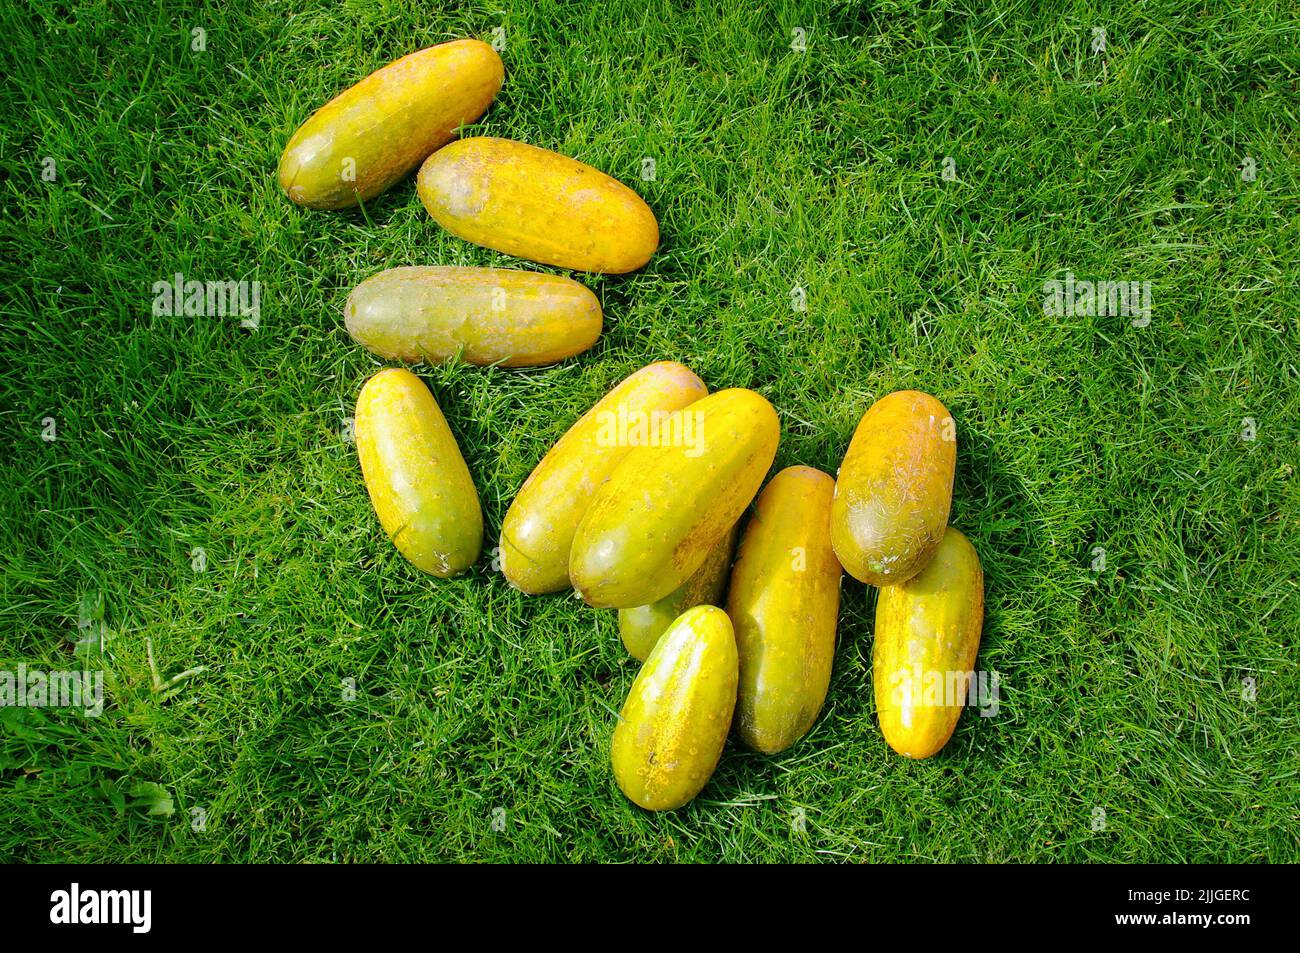 Yellow ripe cucumber fruits lying on the green grass. Top down view. Stock Photo